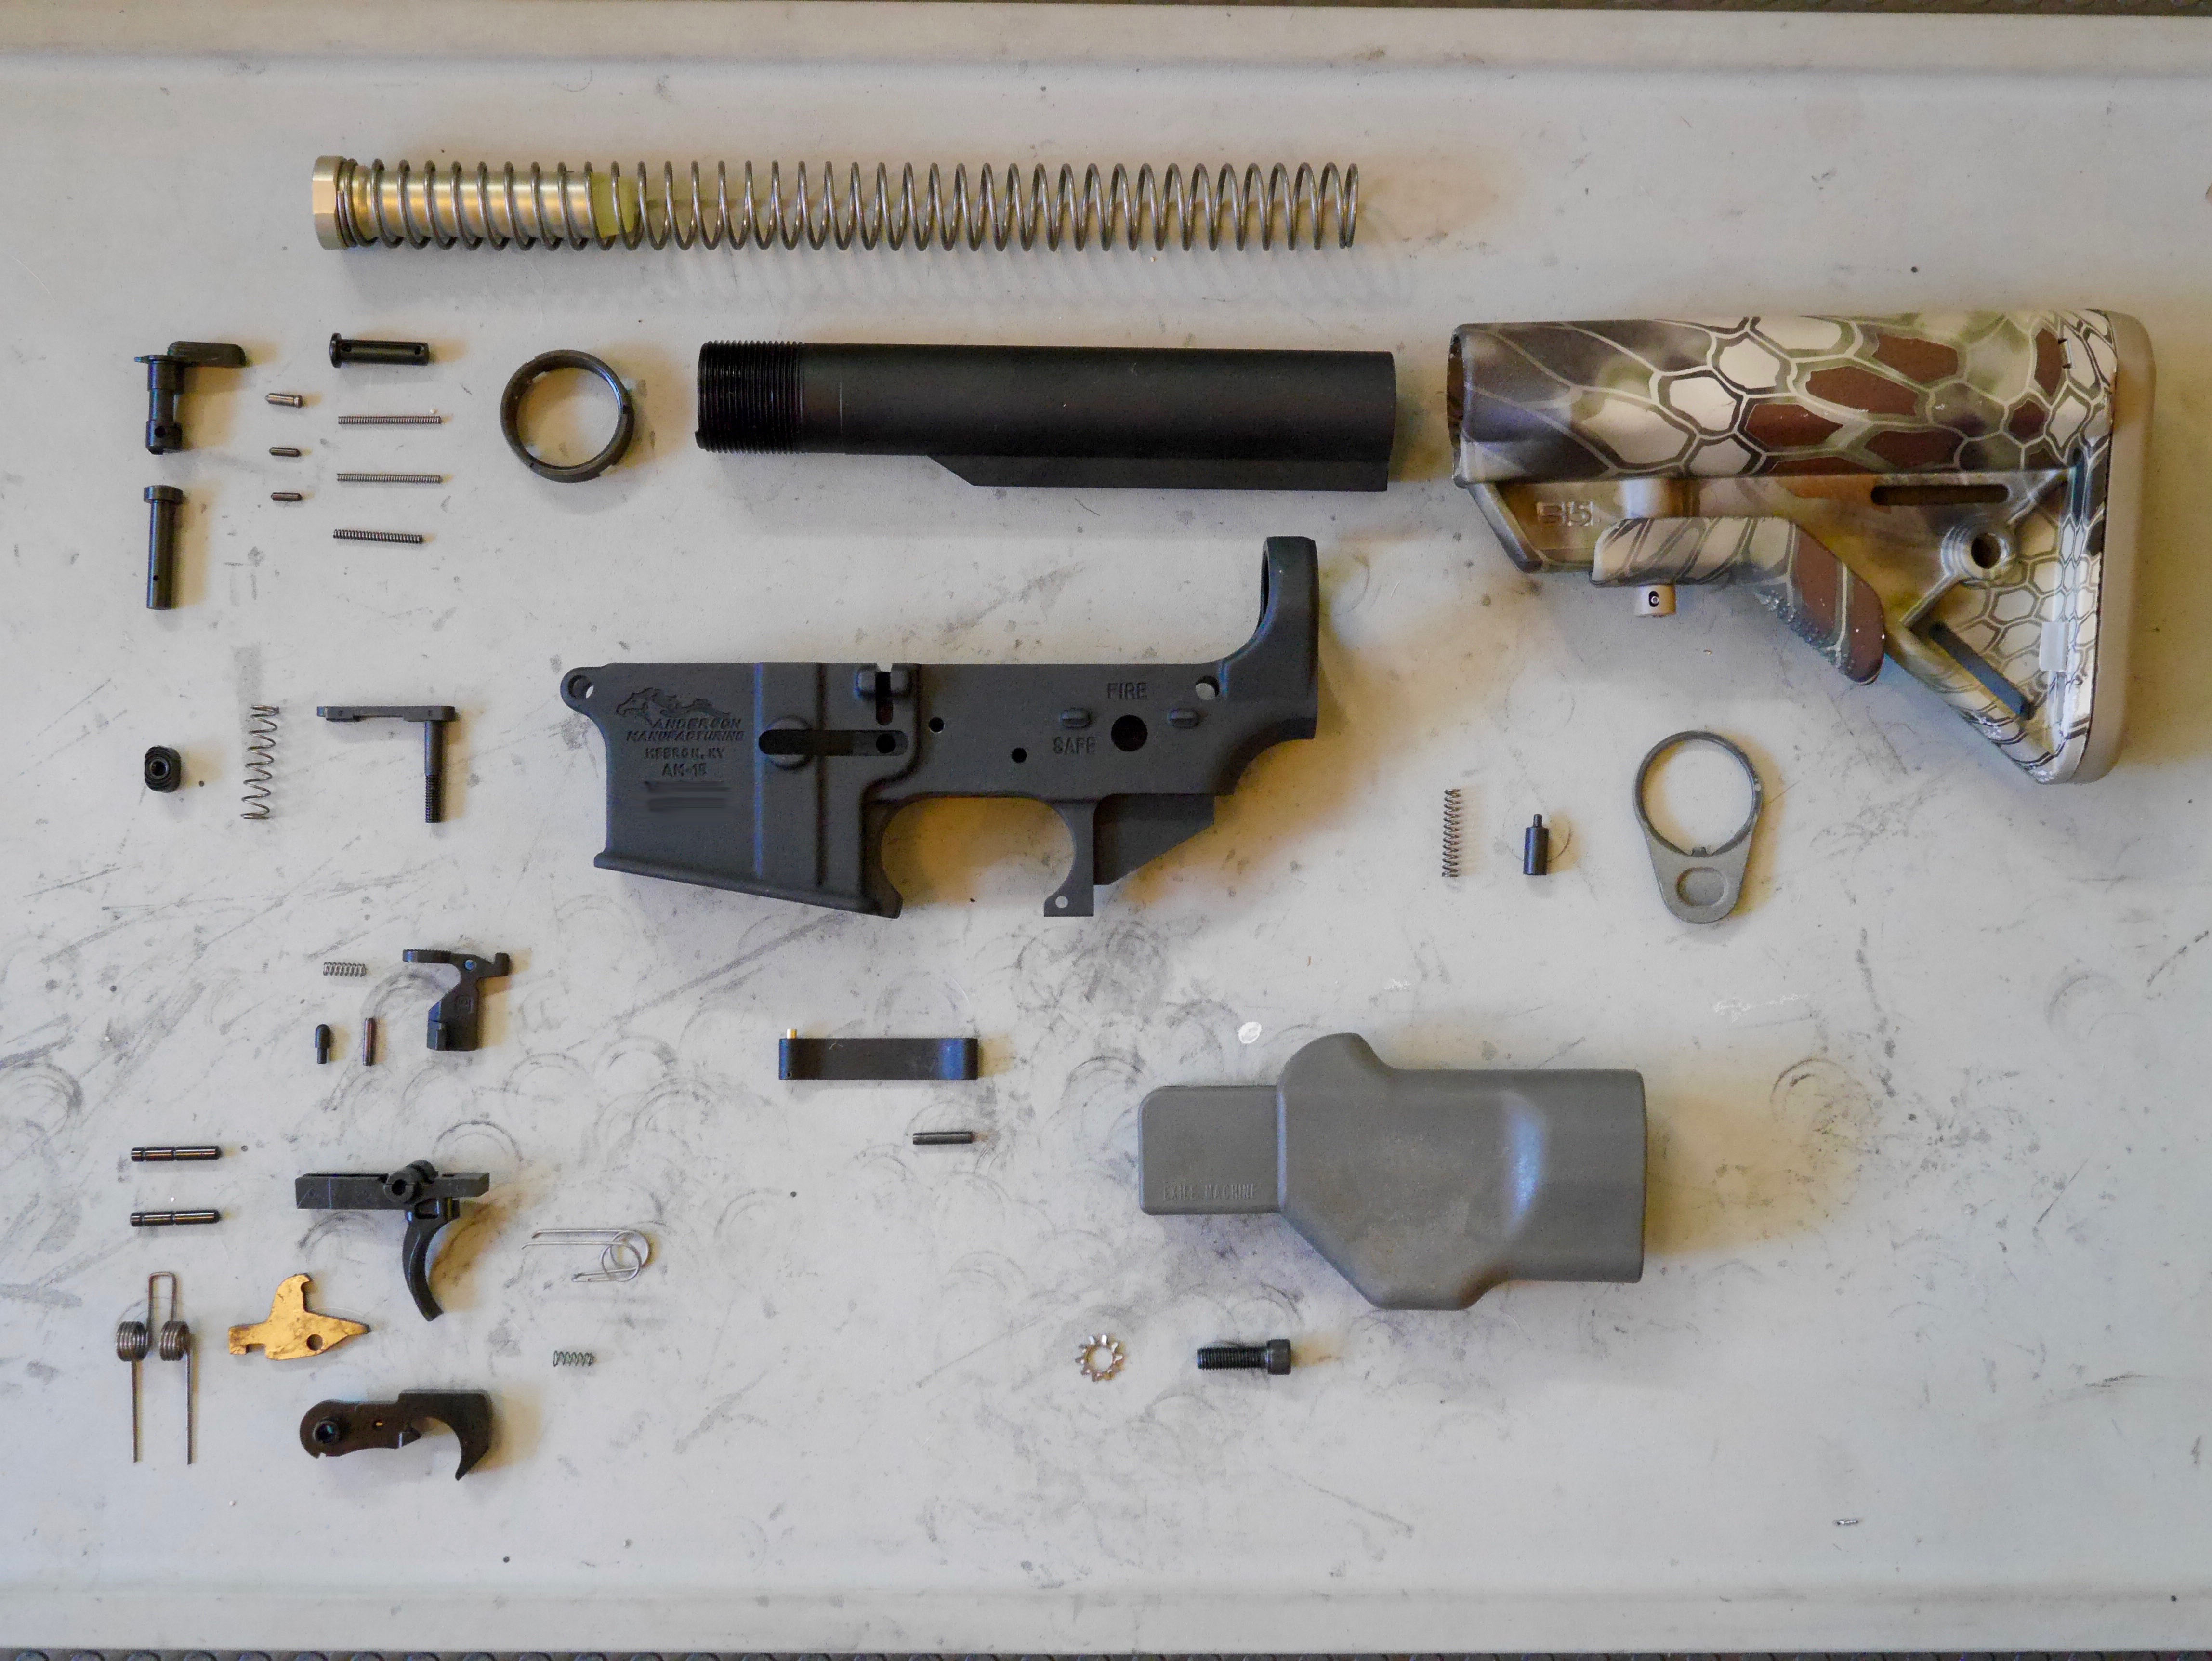 Ar 15 Parts Diagram How To Build An Ar 15 Lower Receiver Ultimate Visual Guide Pew